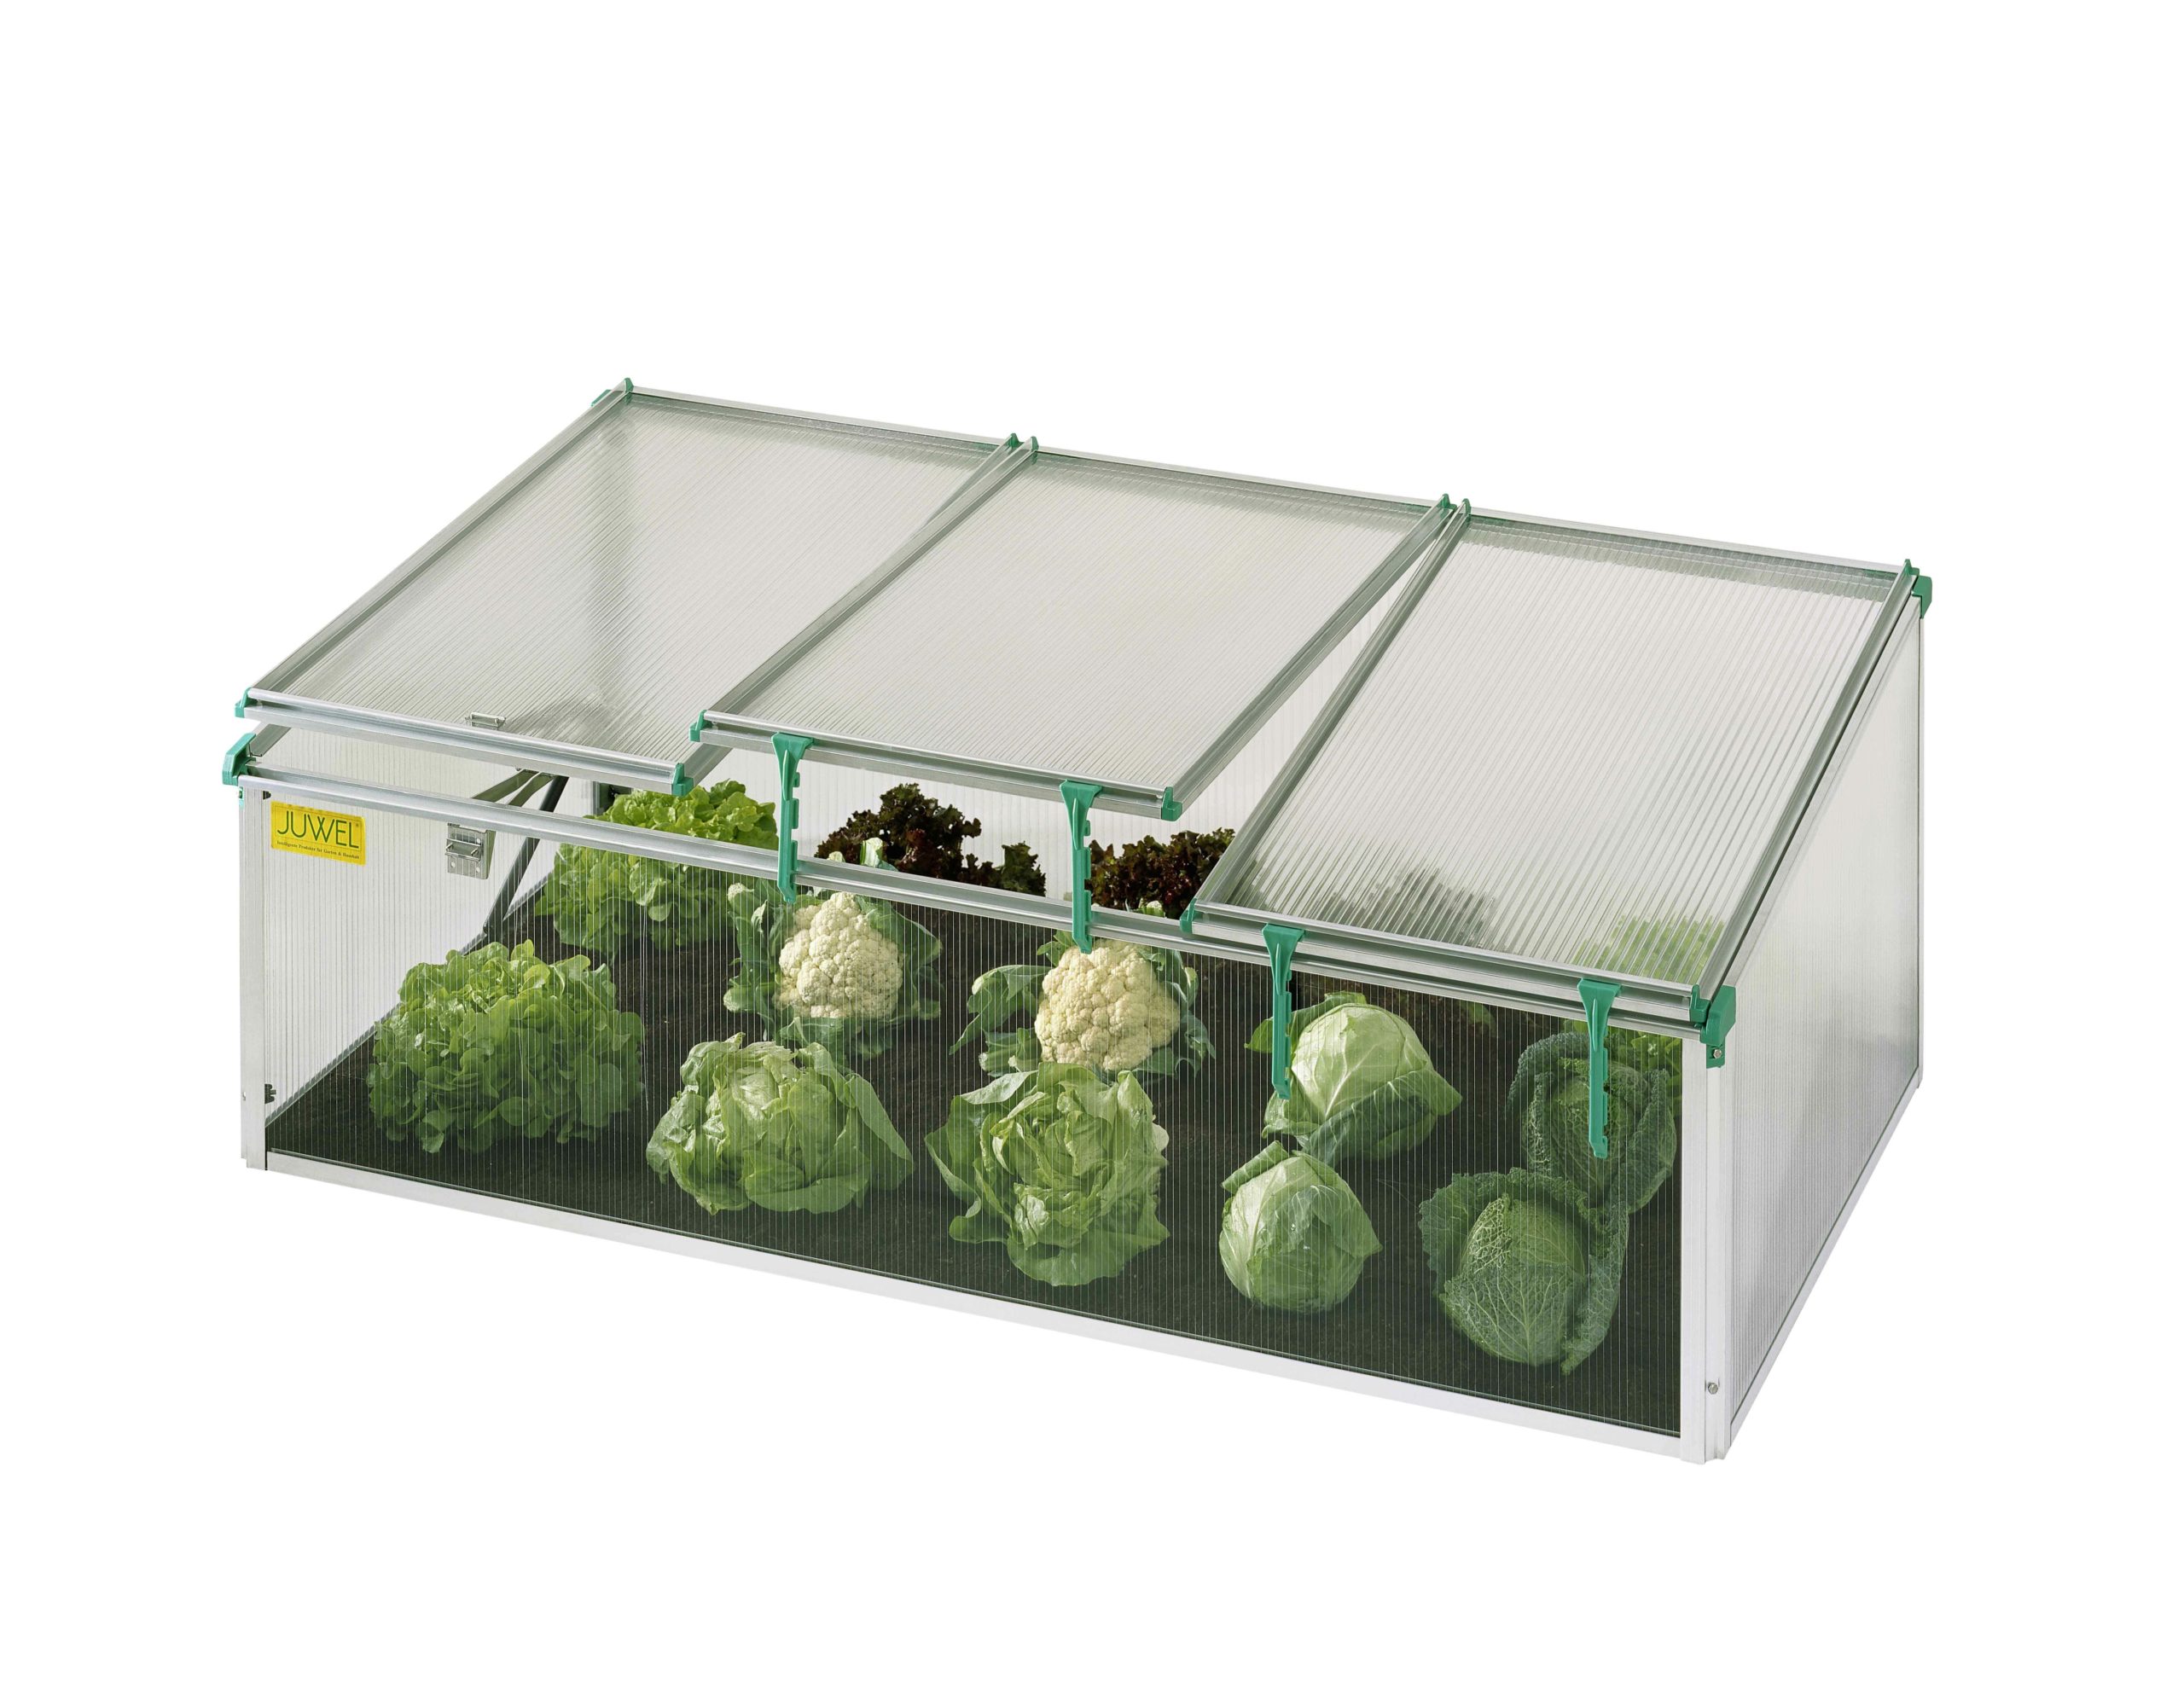 The Juwel Biostar 1500 cold frame can be used for starting seedlings, hardening off, propagation, year-round vegetable crops and much more.  About 5 feet long and nearly 3 feet wide, it comes with one automatic vent and clips to keep the other two sashes open for venting as needed.  Made with 8mm polycarbonate glazing, it’s one of if not the best pre-fab cold frames.